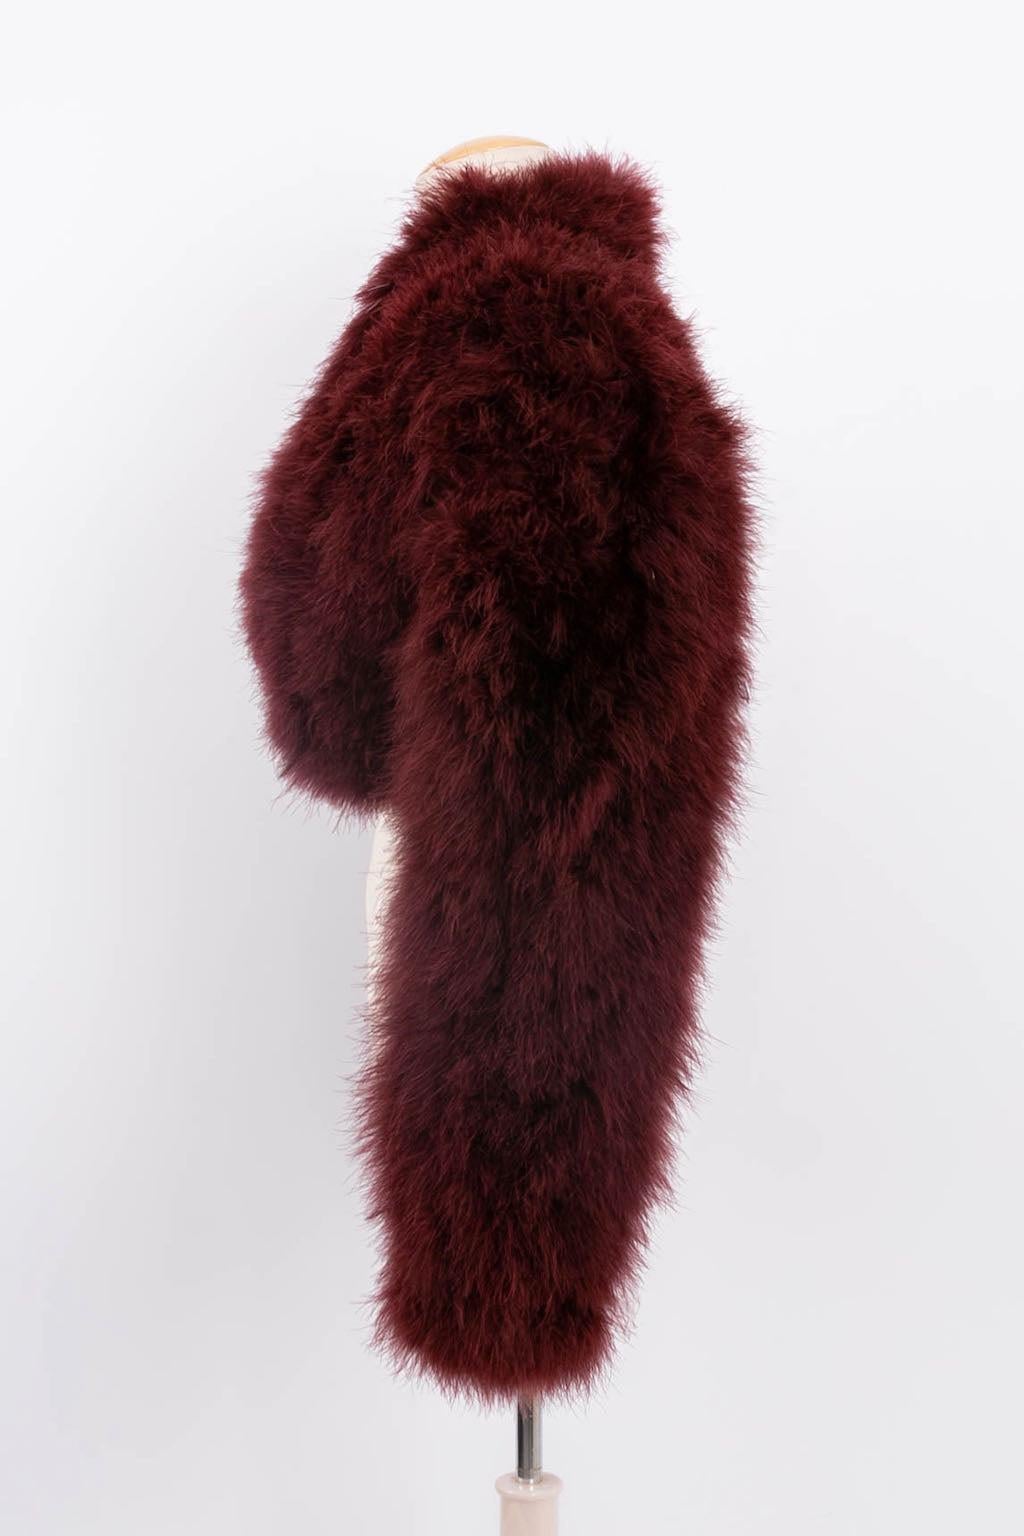 Chantal Thomass - Bolero made of burgundy marabou. 1990 Fall-Winter Collection. Indicated size 40FR.

Additional information:
Condition: Very good condition
Dimensions: Shoulders: 45 cm (17.71